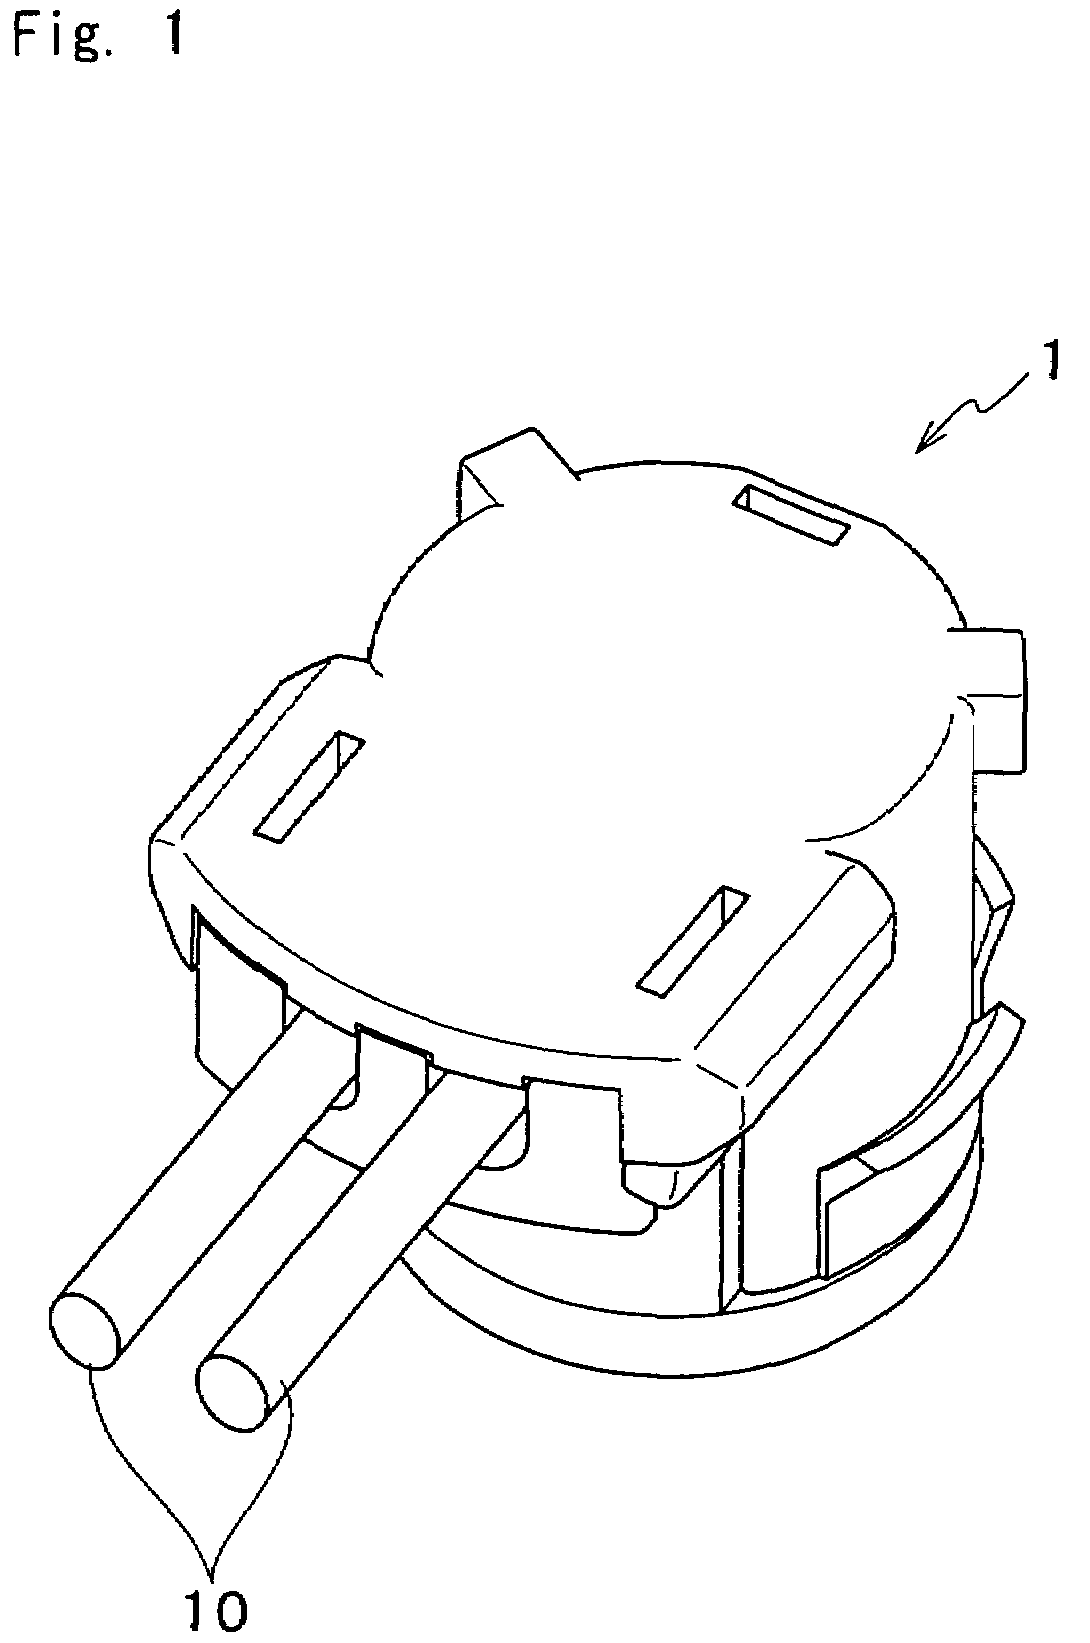 Electrical connecting device having a cover with a latch